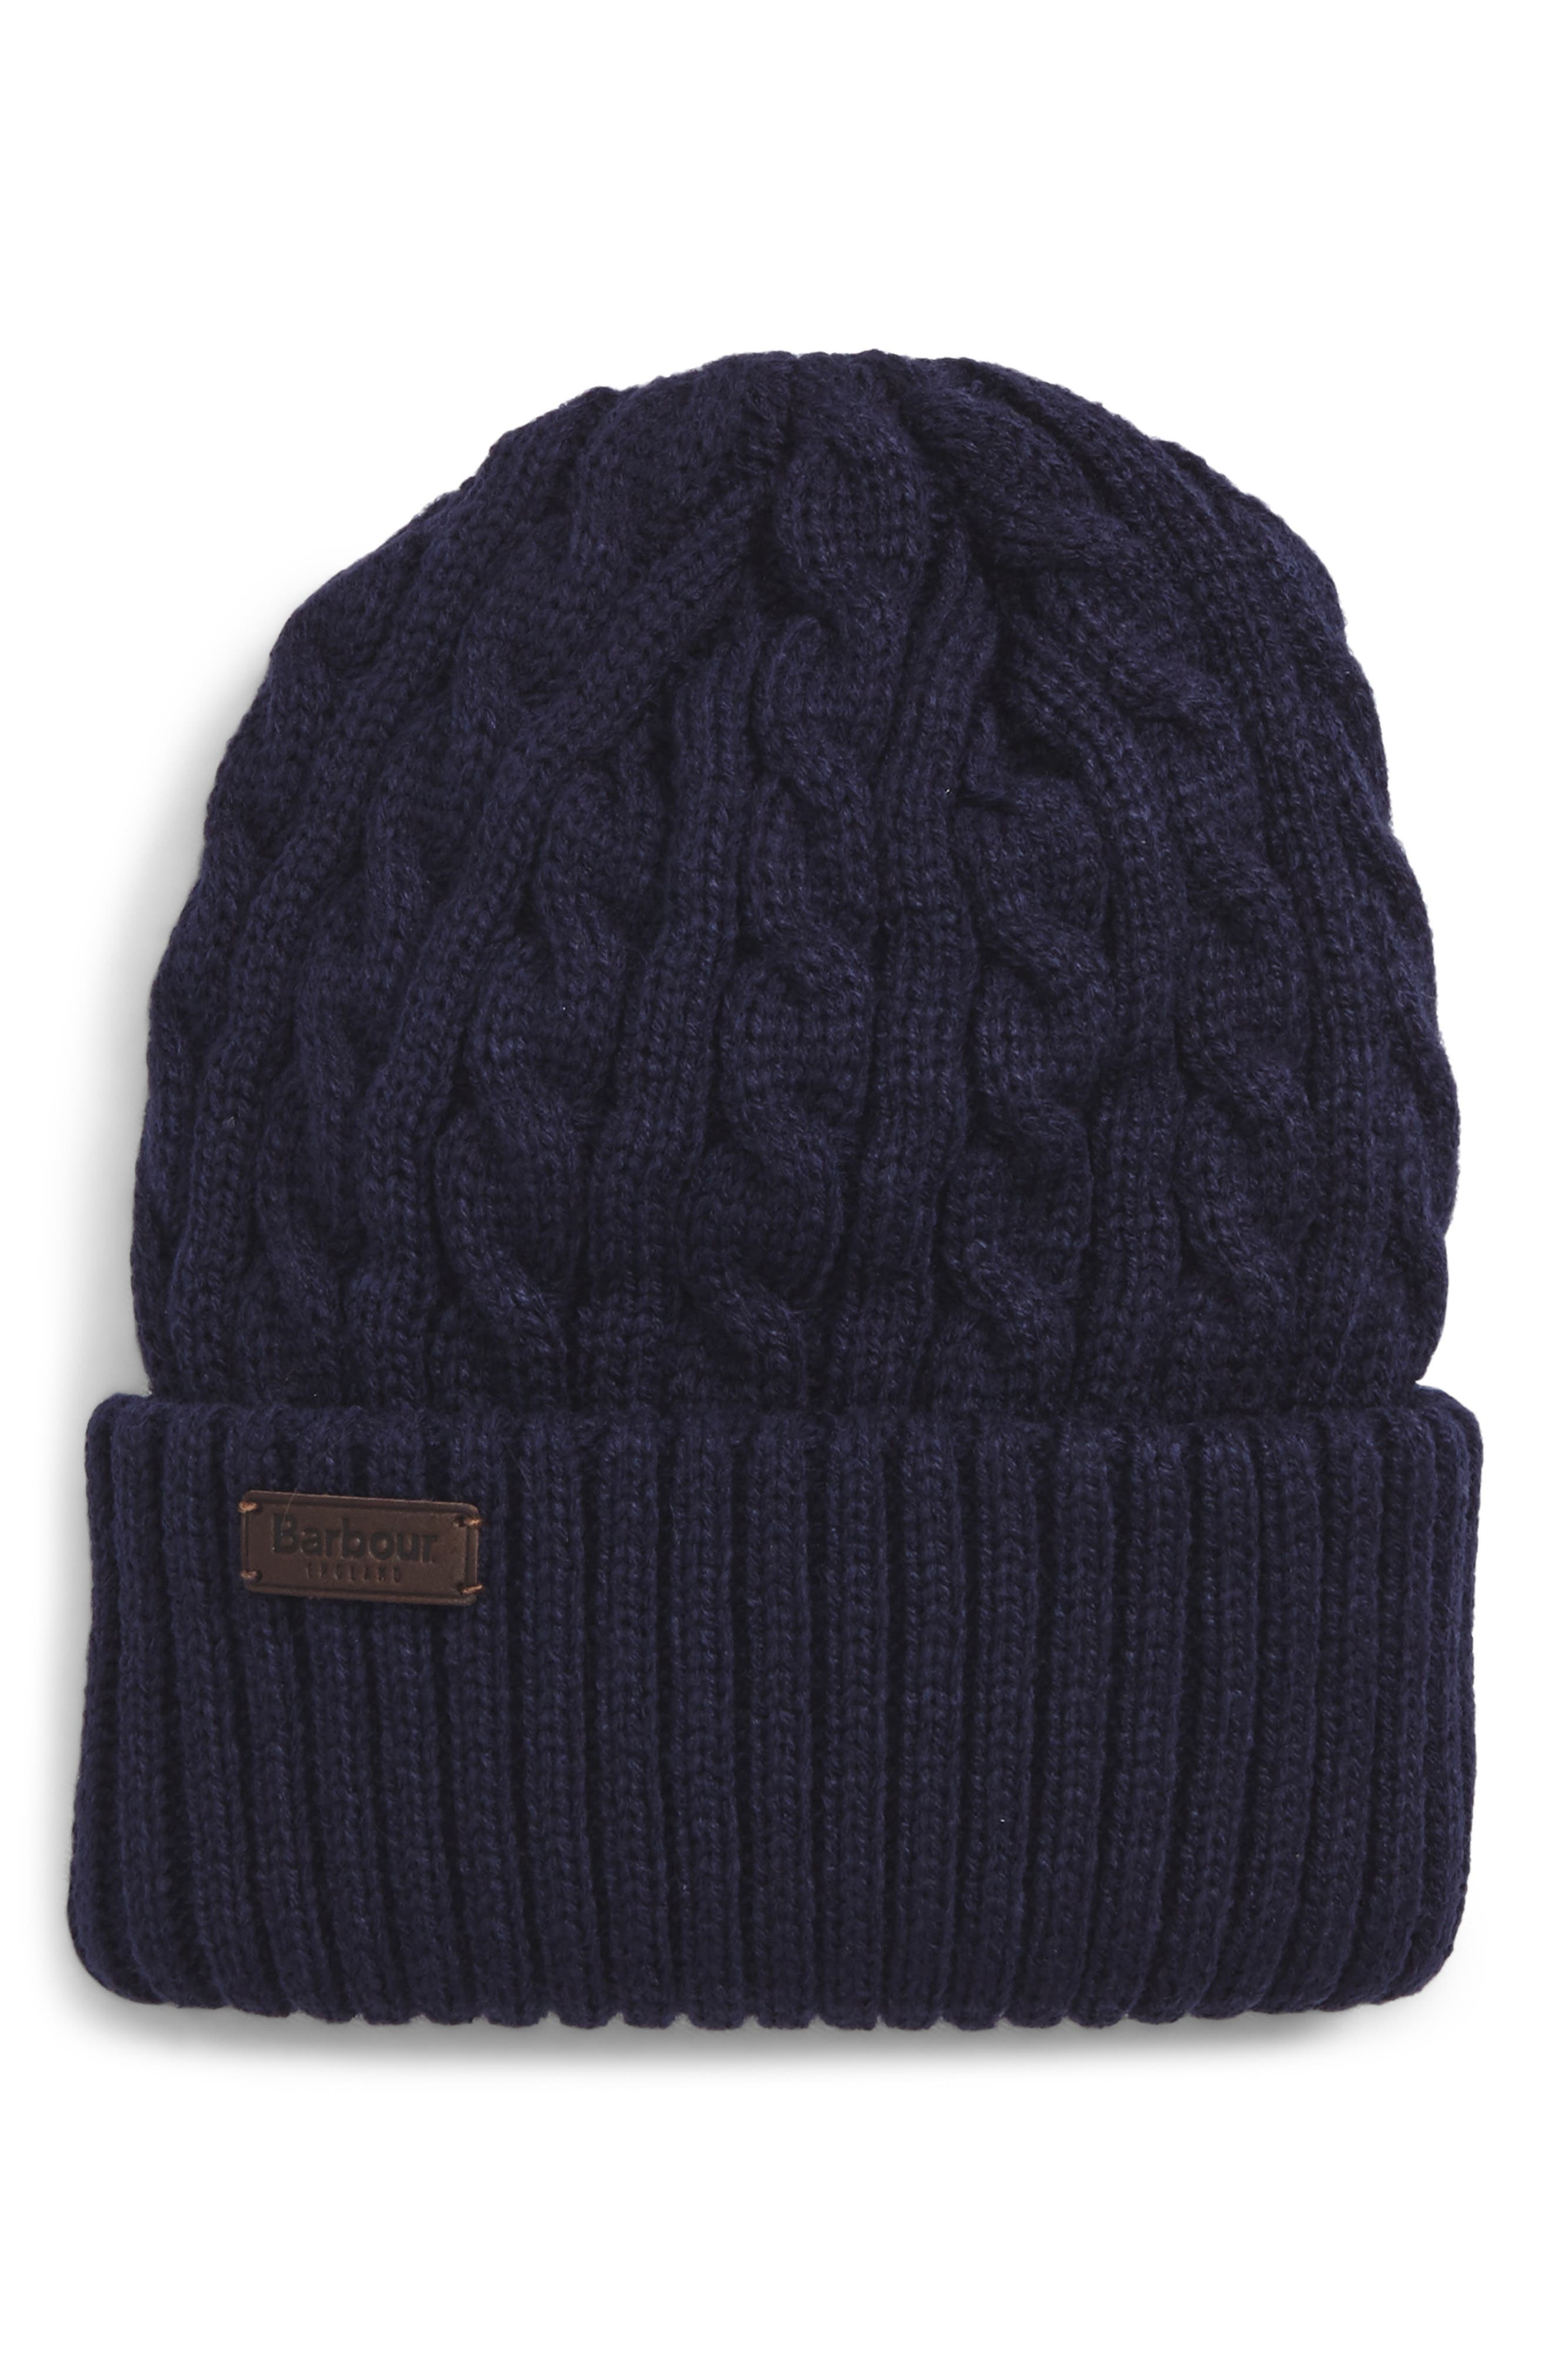 Barbour | Balfron Cable Knit Beanie 